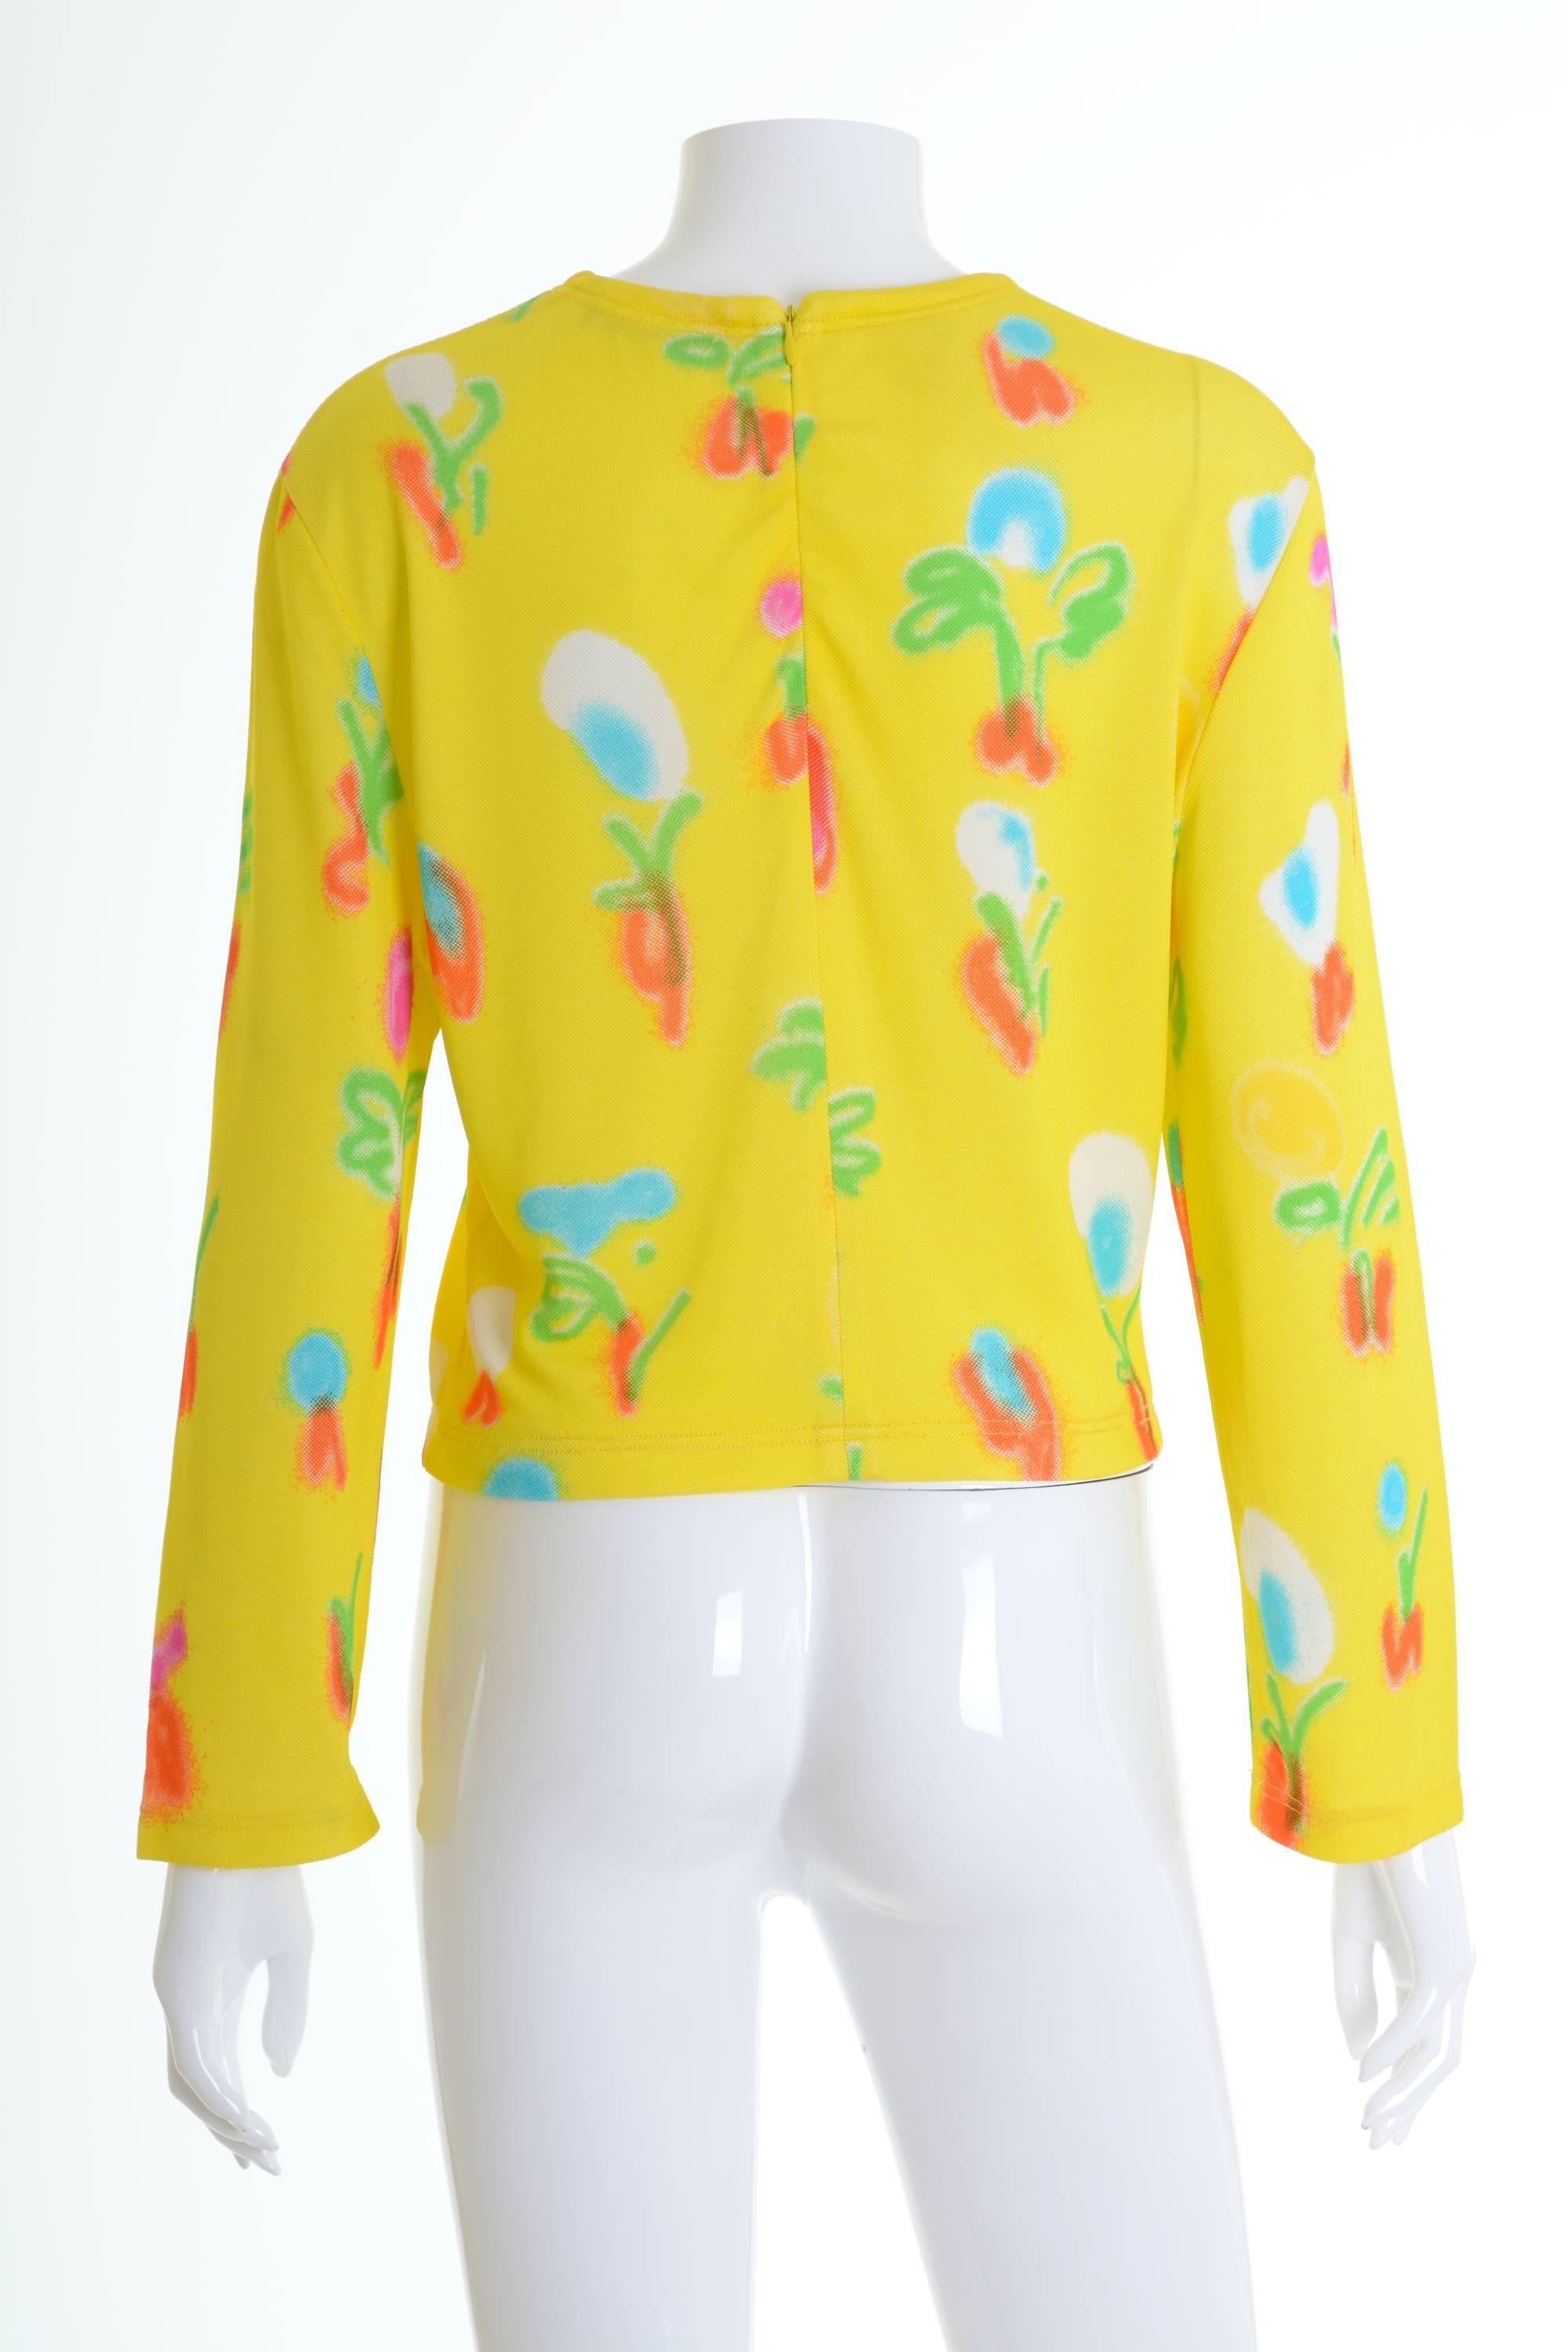 This amazing GIANNI VERSACE Couture blouse shirt from 1996 collection is n a printed polyester fabric. It has v-neckline, long sleeves and a back zip closure.

Very good vintage condition

Label: Gianni Versace Couture
Fabric: polyester 
Colour: